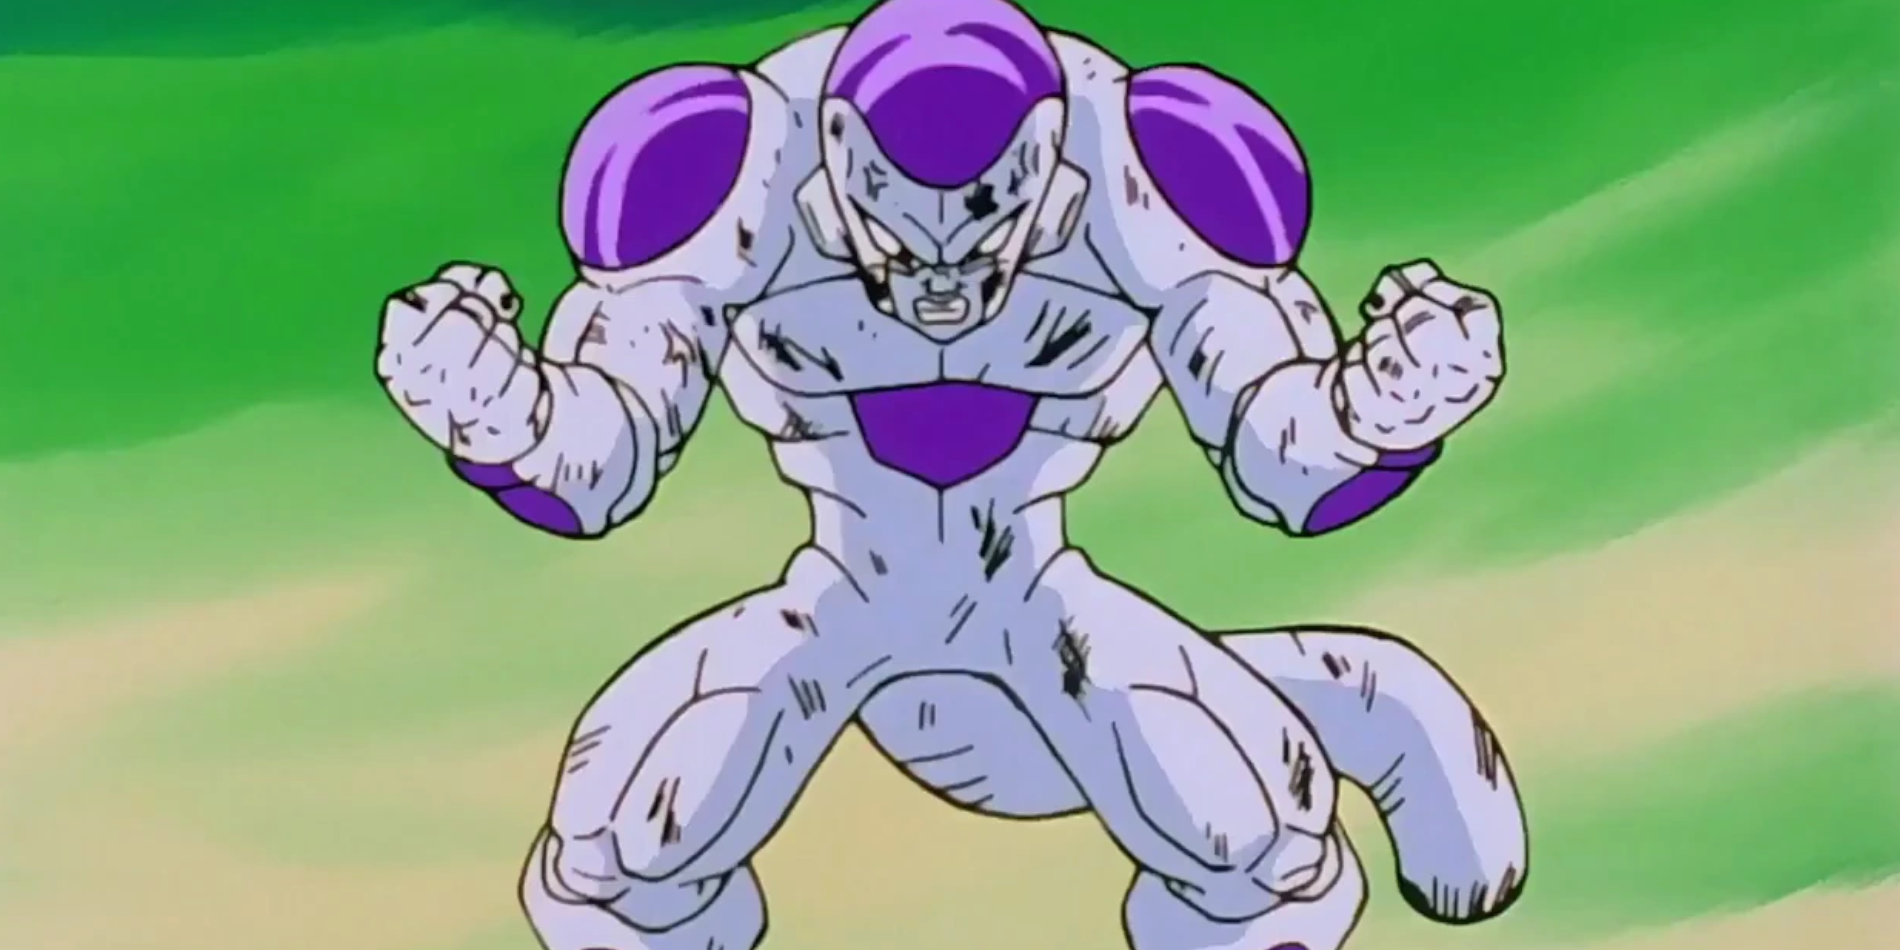 Frieza in his 100% Form is flexing his muscles.